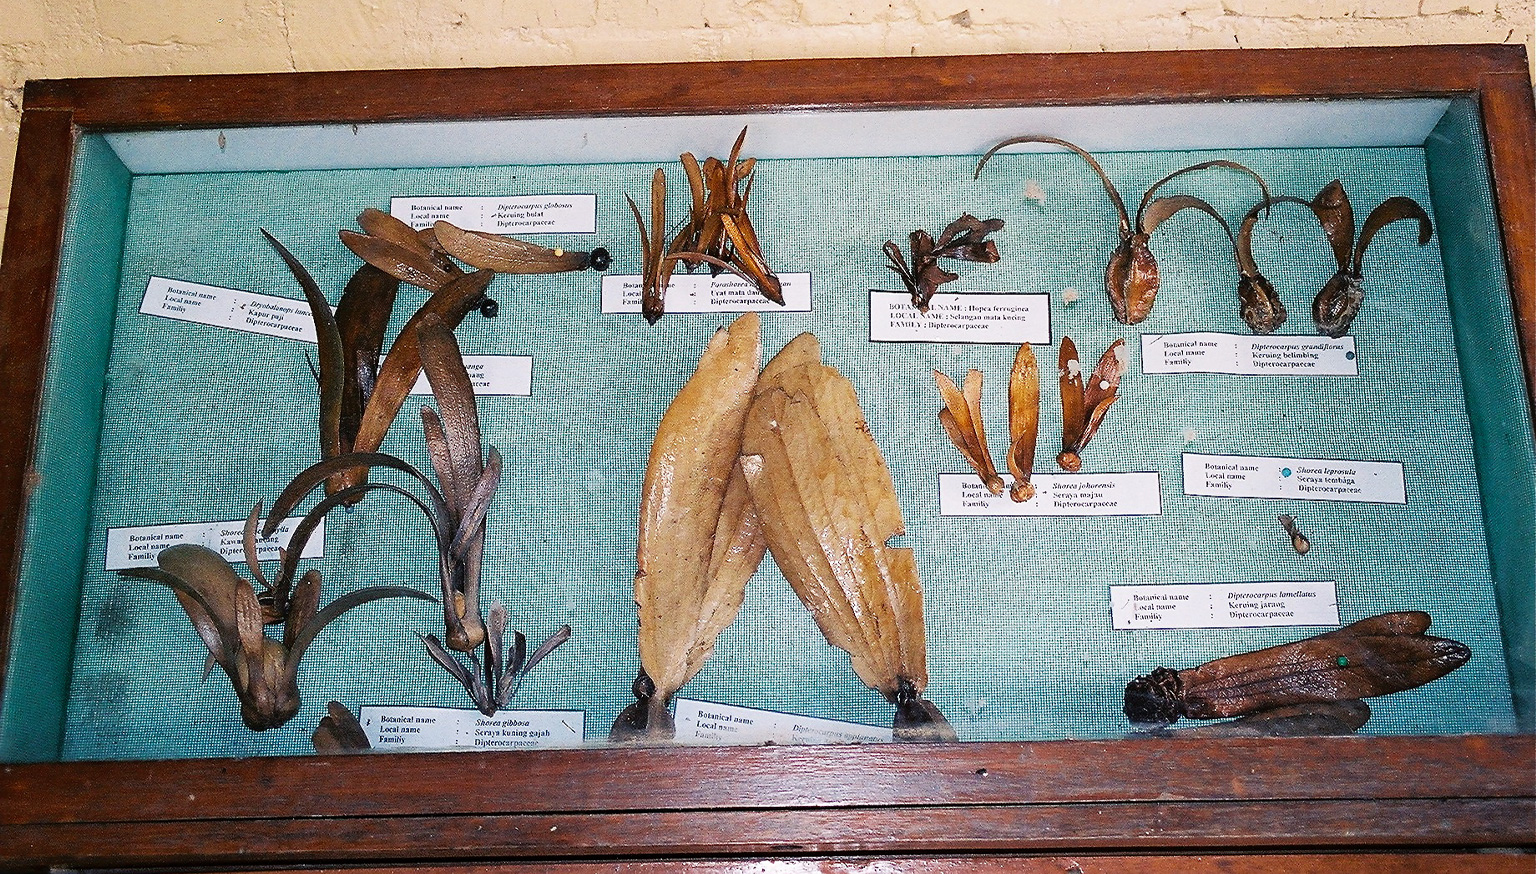 Dipterocarp seeds of trees found in Sabah's rainforests.